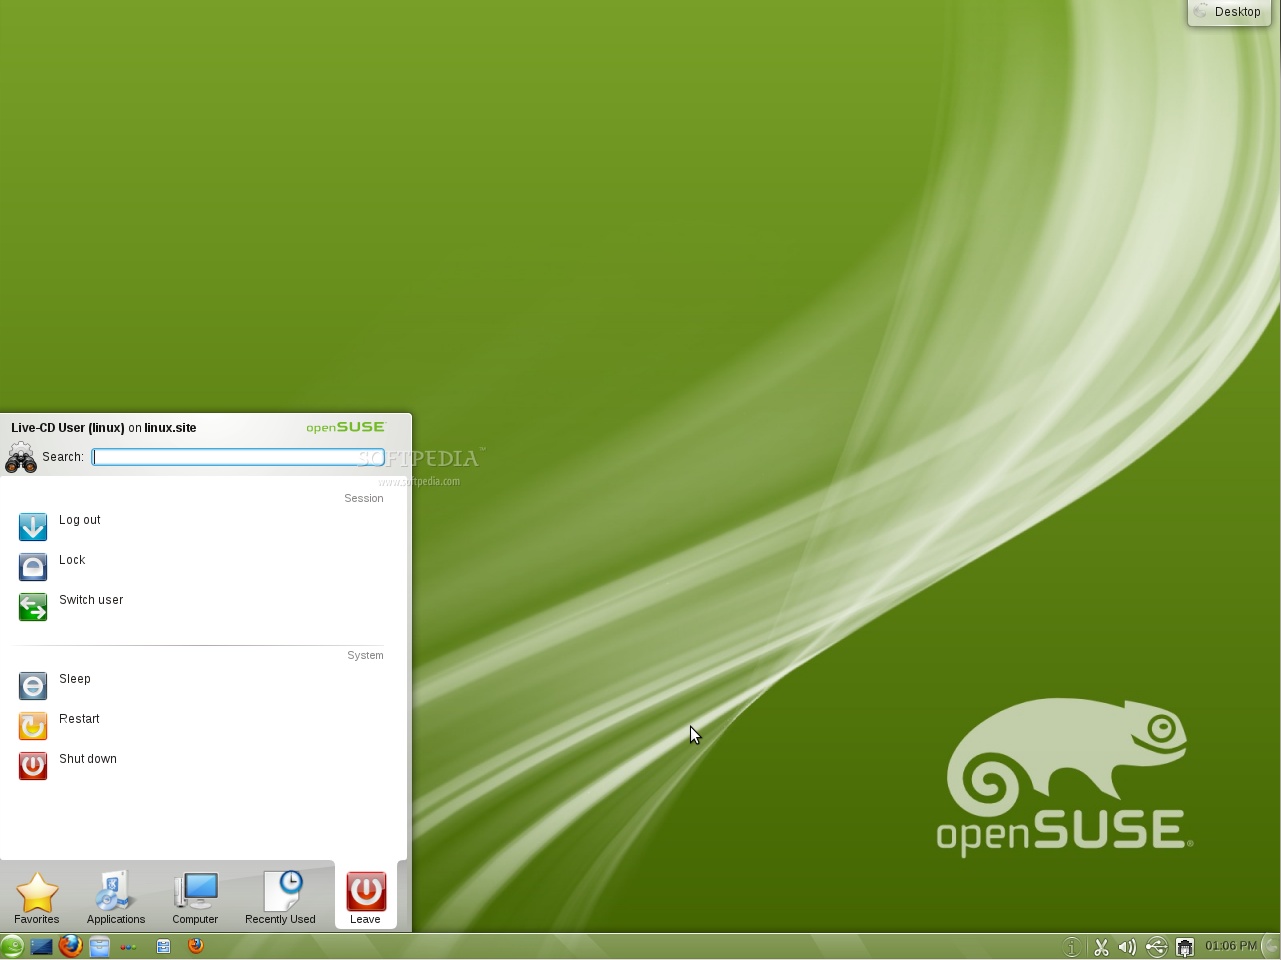 free ebook opensuse leap download